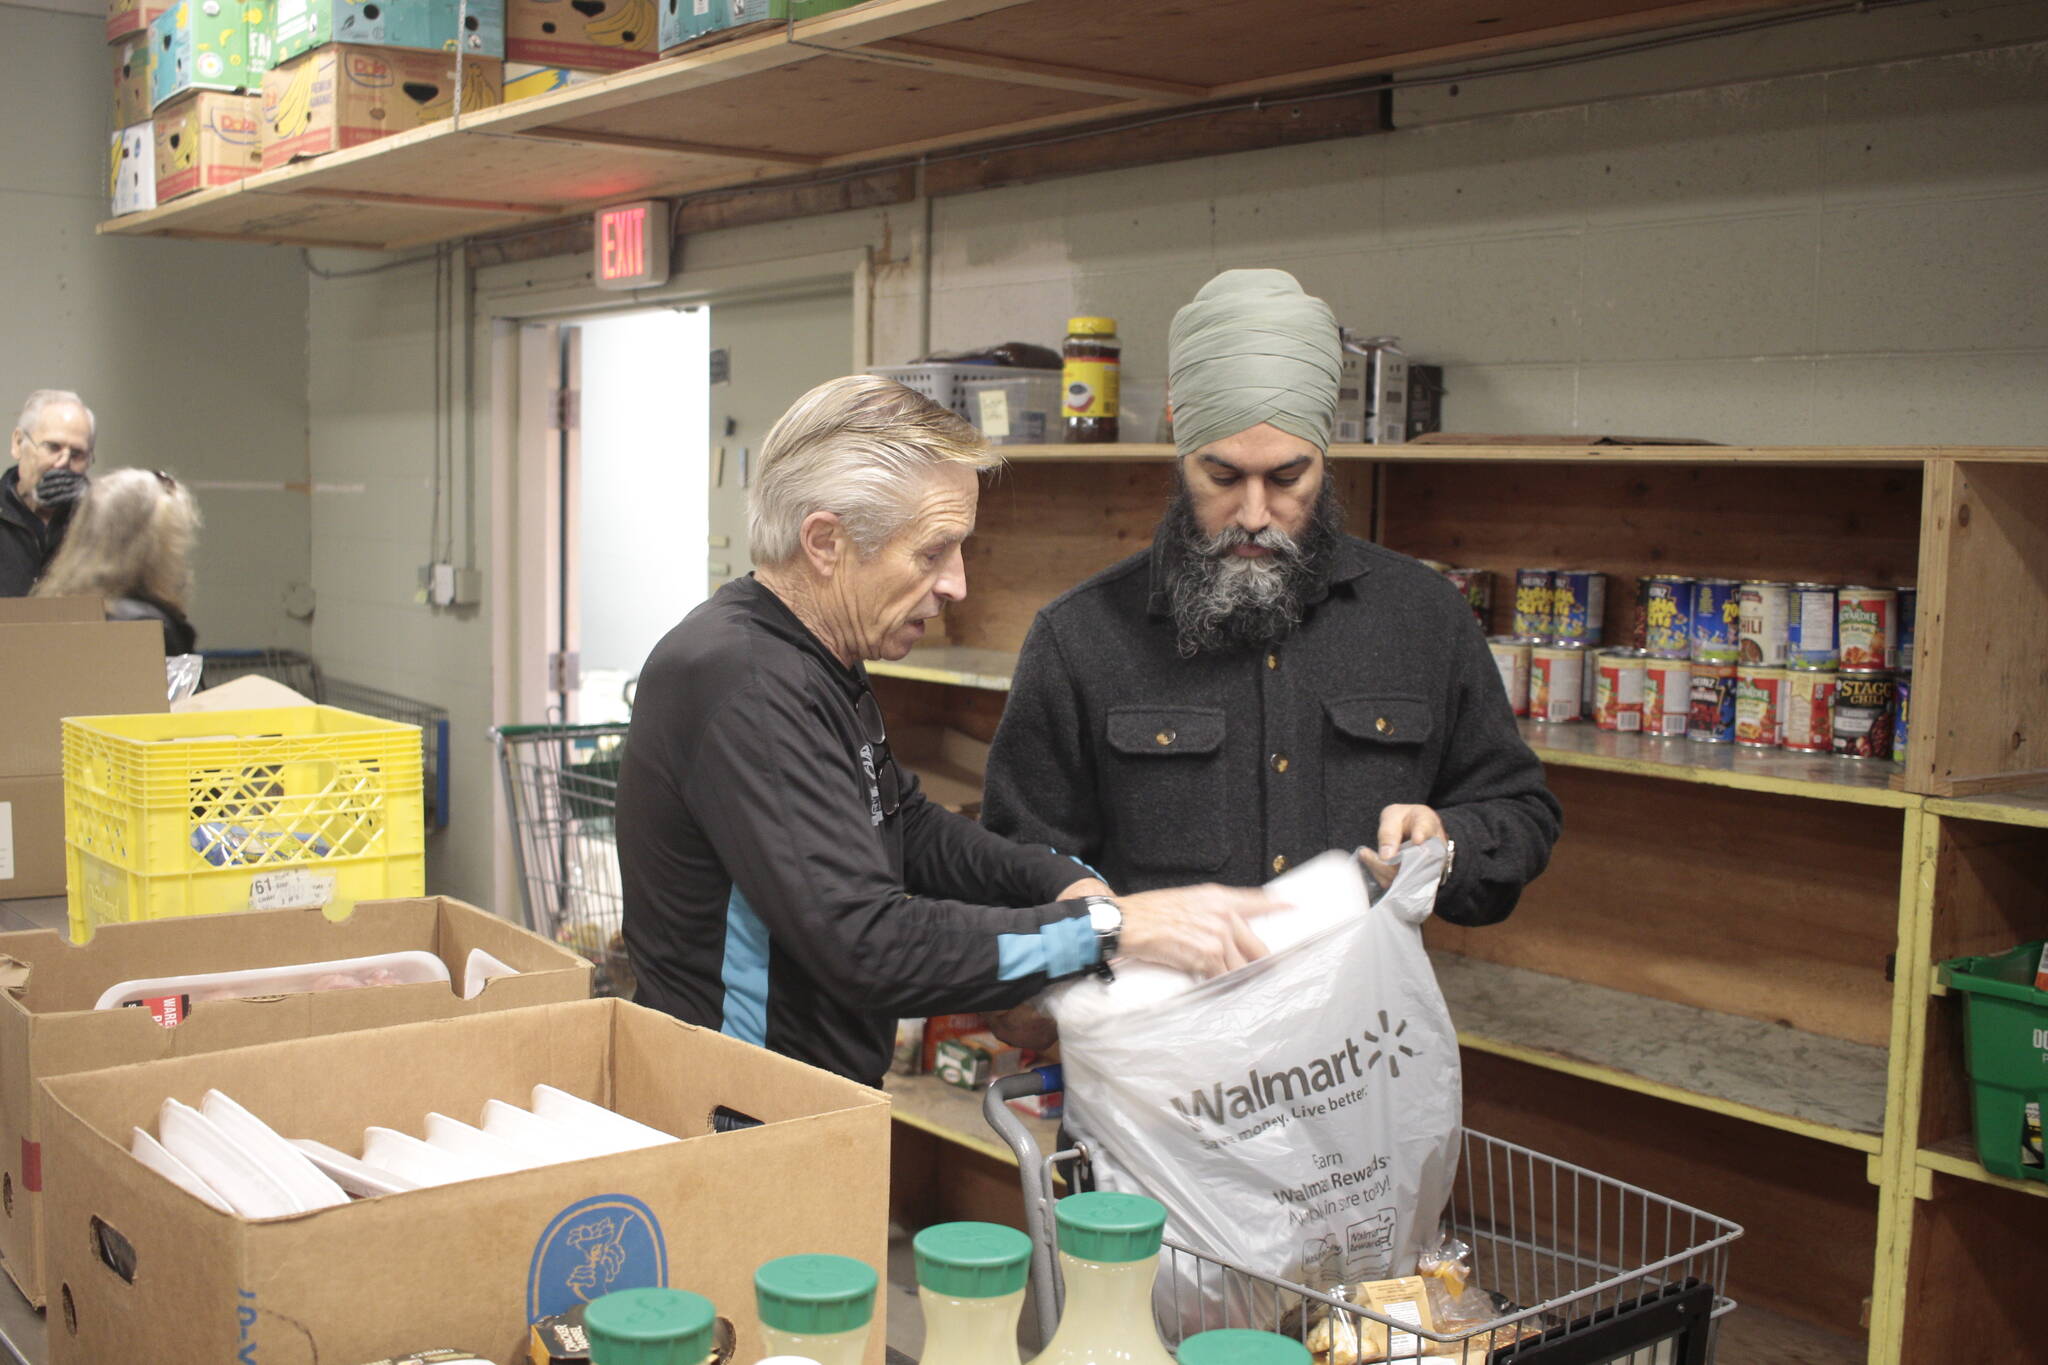 Campbell River food bank volunteer Bob Naylor helps federal NDP leader Jagmeet Singh fill a bag of food for a food bank client during Singh’s visit to Campbell River on Jan. 23. Photo by Marc Kitteringham/Campbell River Mirror